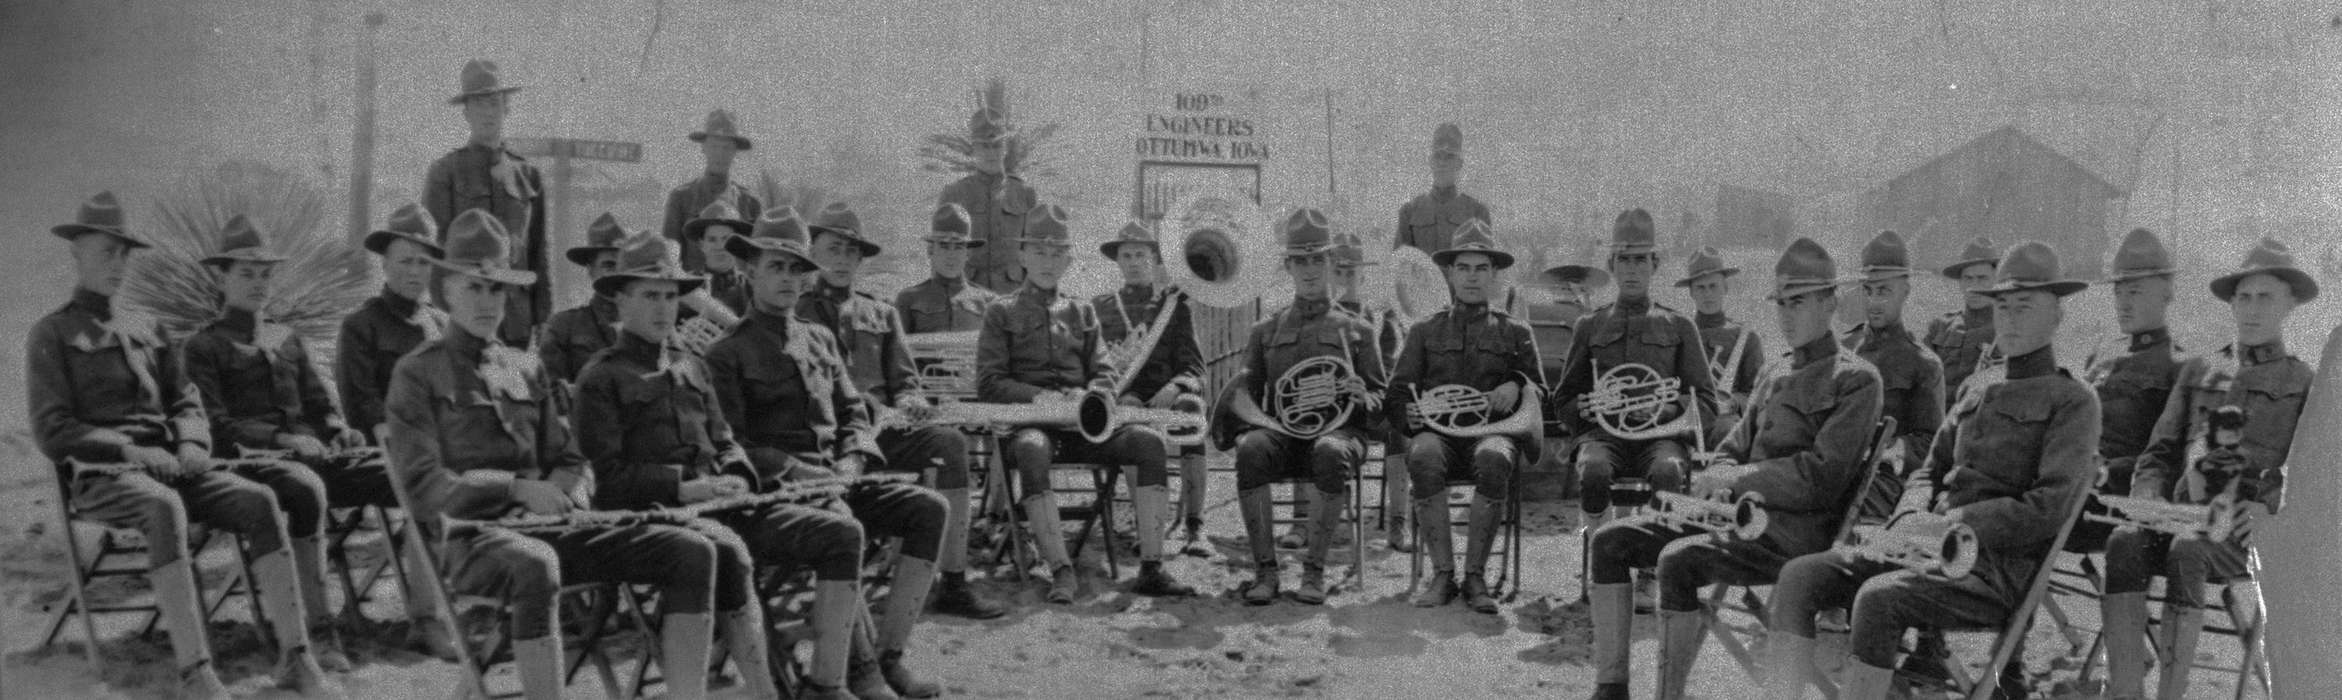 Lemberger, LeAnn, trumpet, Iowa History, flute, military, history of Iowa, Portraits - Group, Military and Veterans, french horn, band, USA, Iowa, tuba